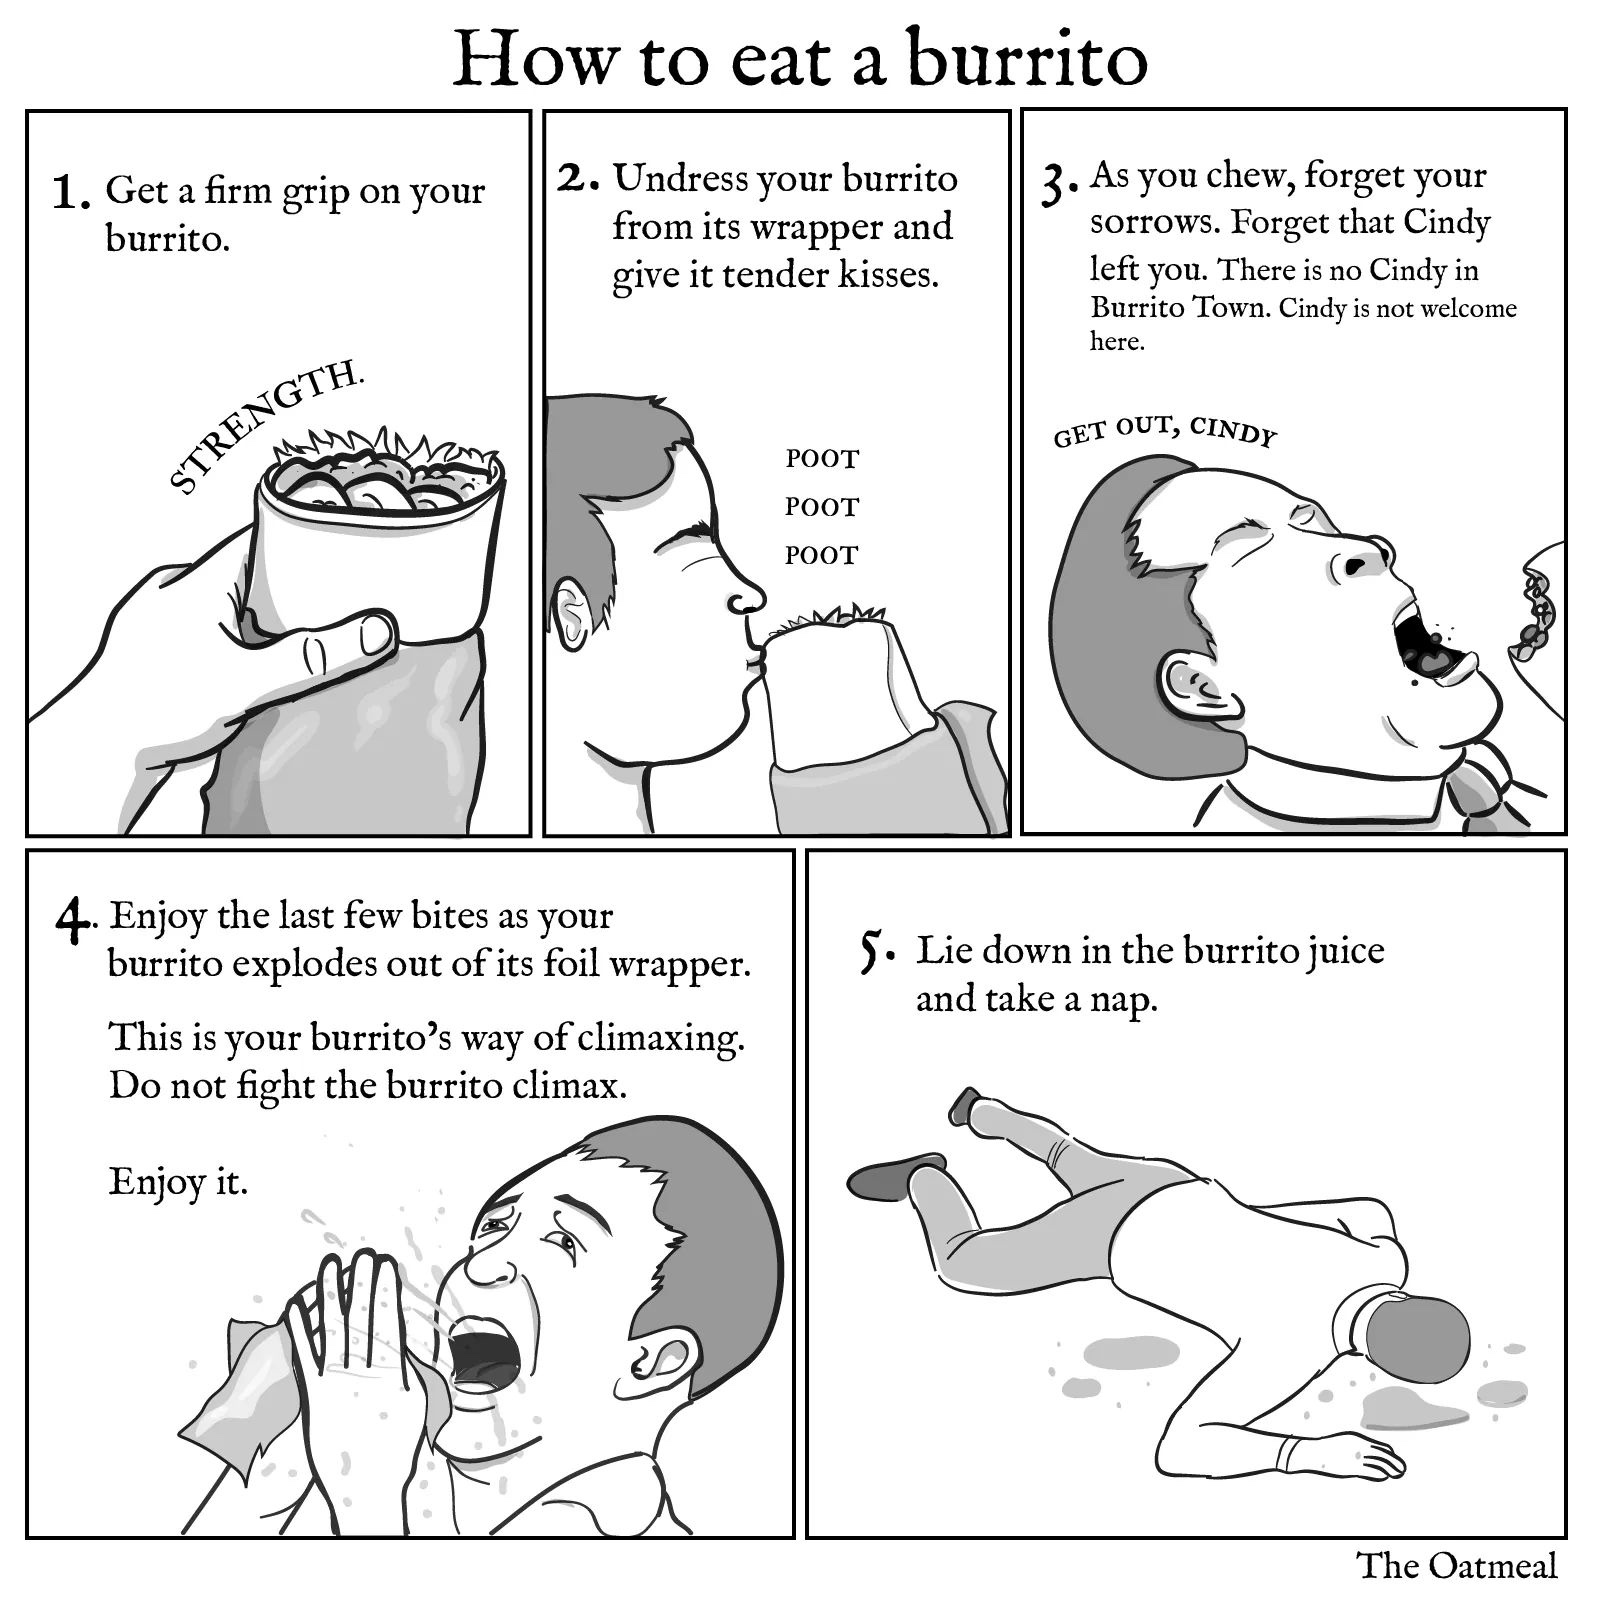 oatmeal burrito - How to eat a burrito 1. Get a firm grip on your burrito. || 2. Undress your burrito from its wrapper and give it tender kisses. 3. As you chew, forget your sorrows. Forget that Cindy left you. There is no Cindy in Burrito Town. Cindy is 